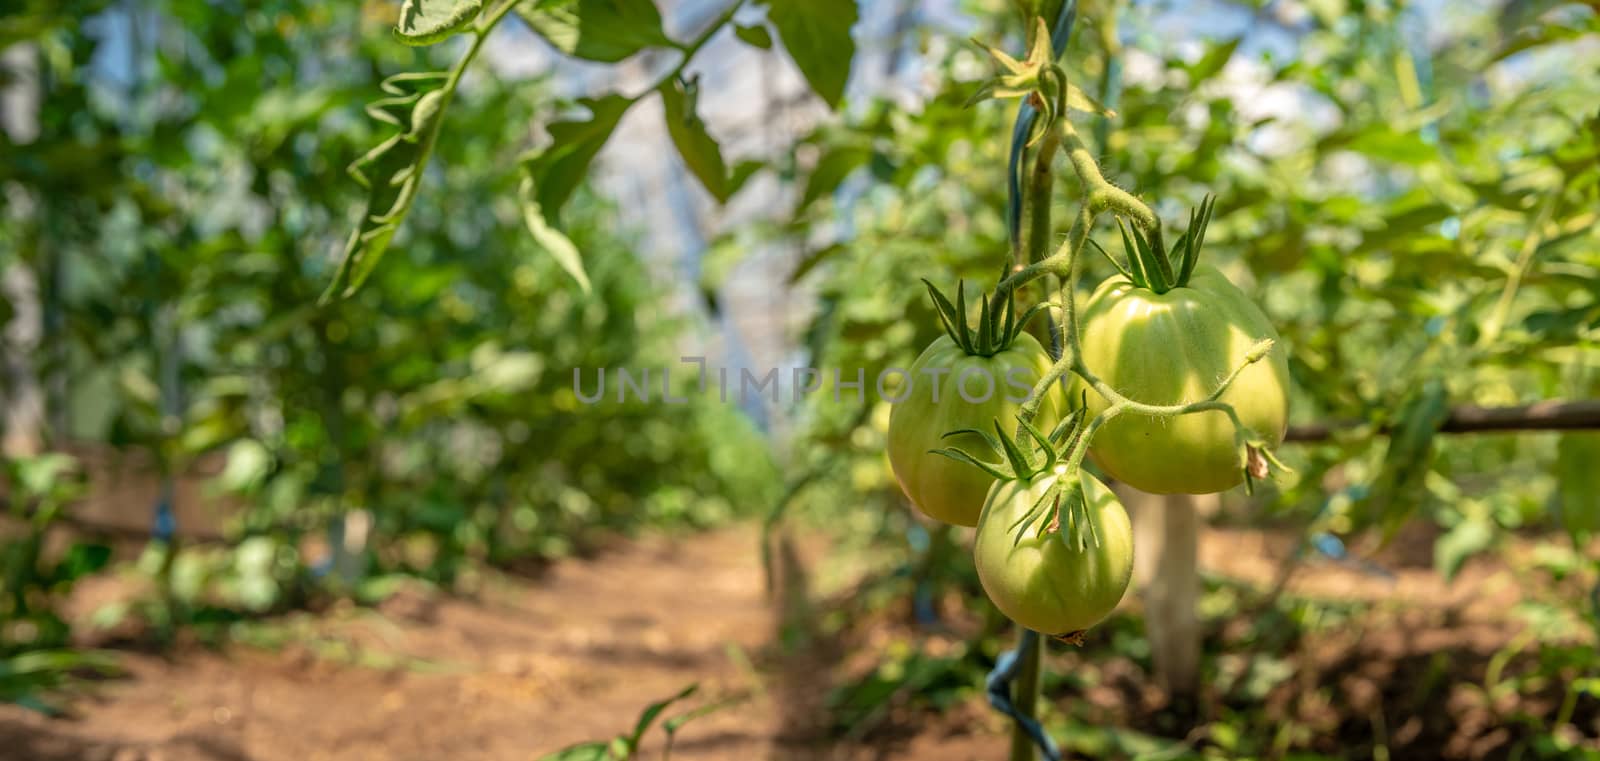 growing tomatoes in organic quality without chemicals in a greenhouse on the farm. healthy food, vegetables